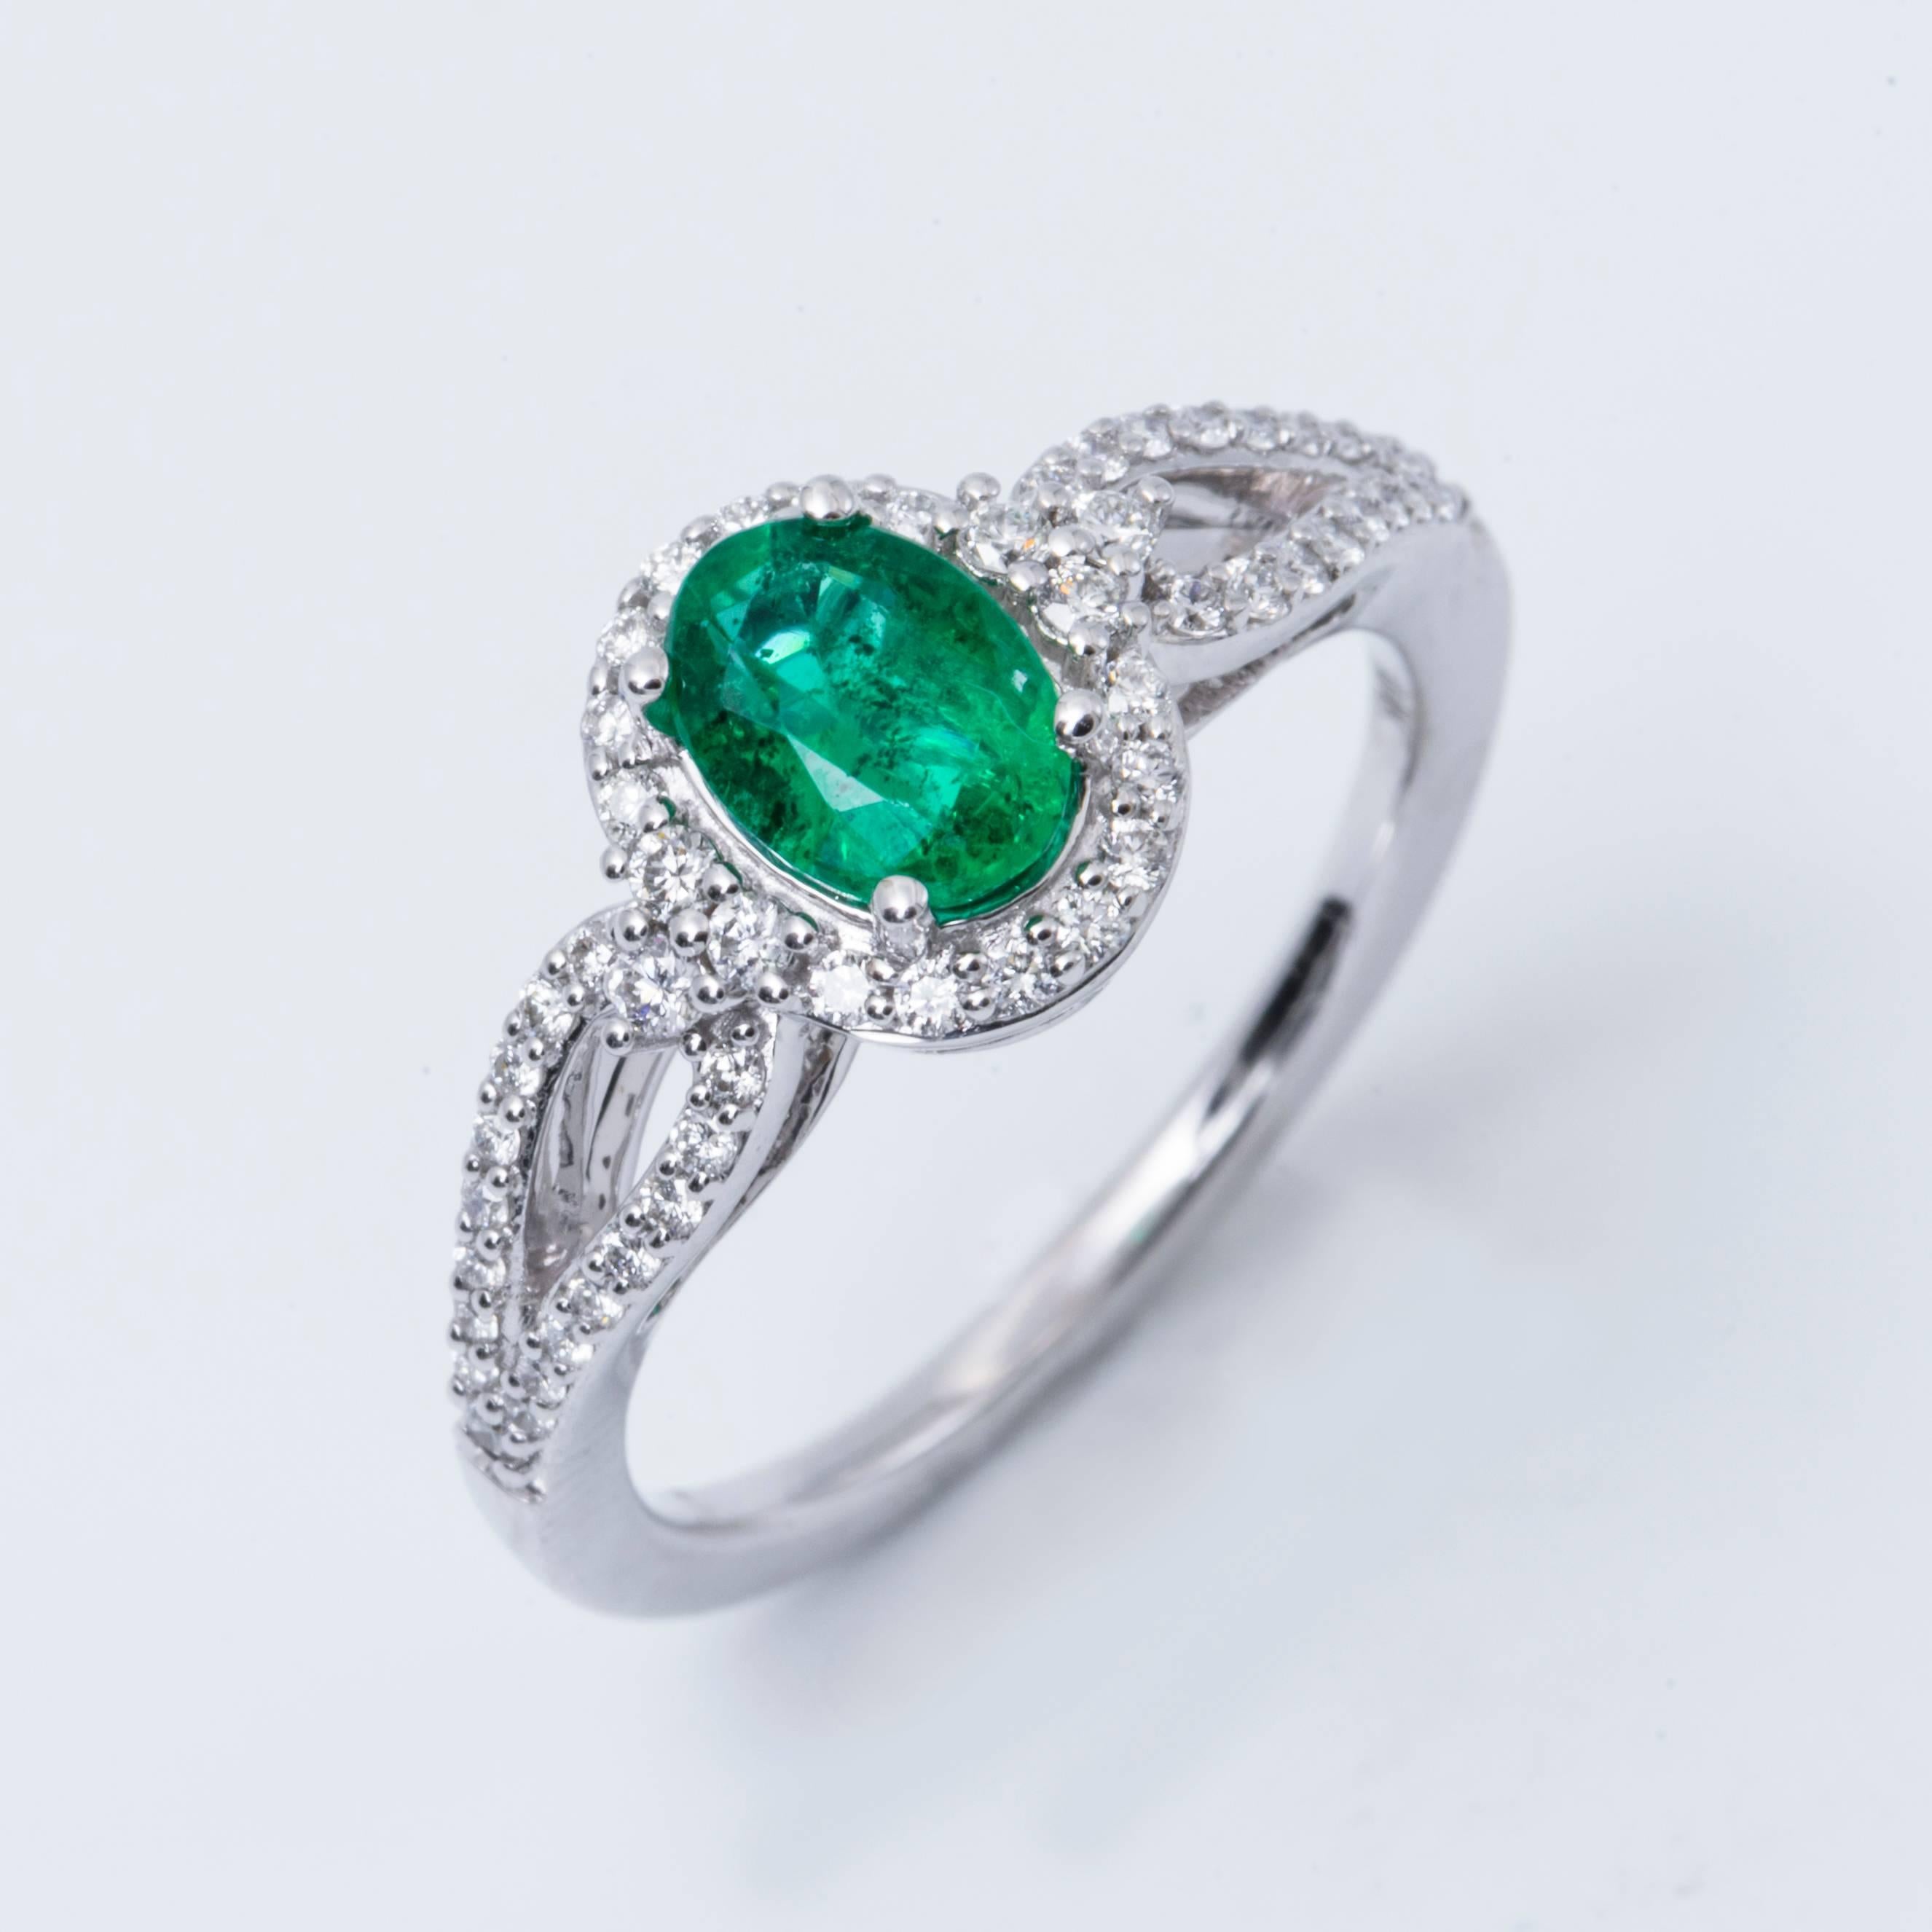 14K white gold, the beautiful Zambian emerald measures 7x5 mm and weighs 0.71 cts..The diamonds weight is 0.32 cts with H Color and SI Clarity.